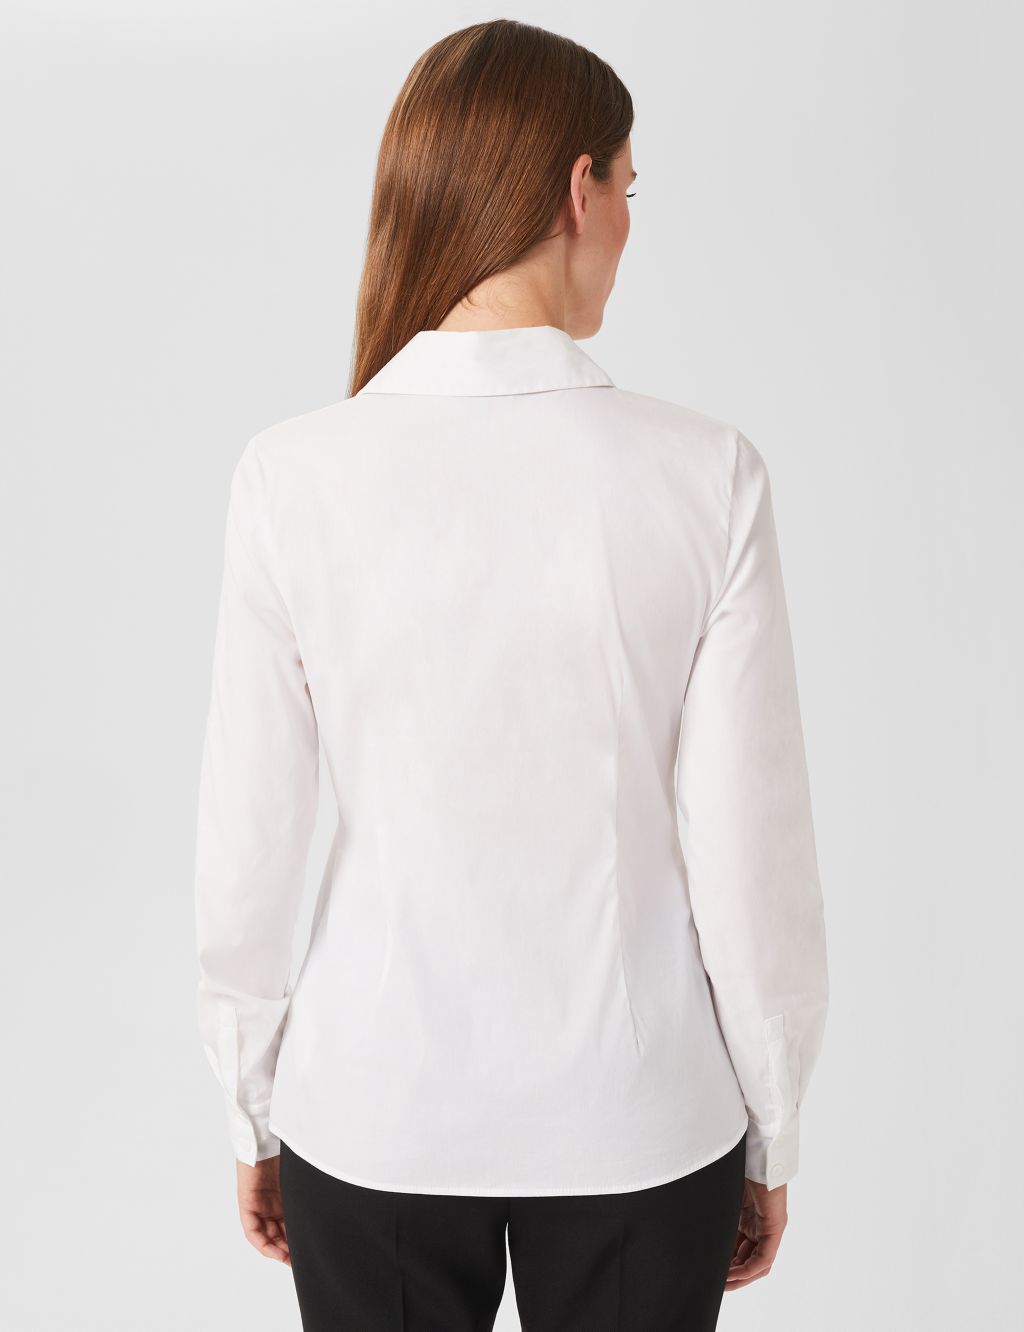 Cotton Rich Collared Long Sleeve Shirt image 3